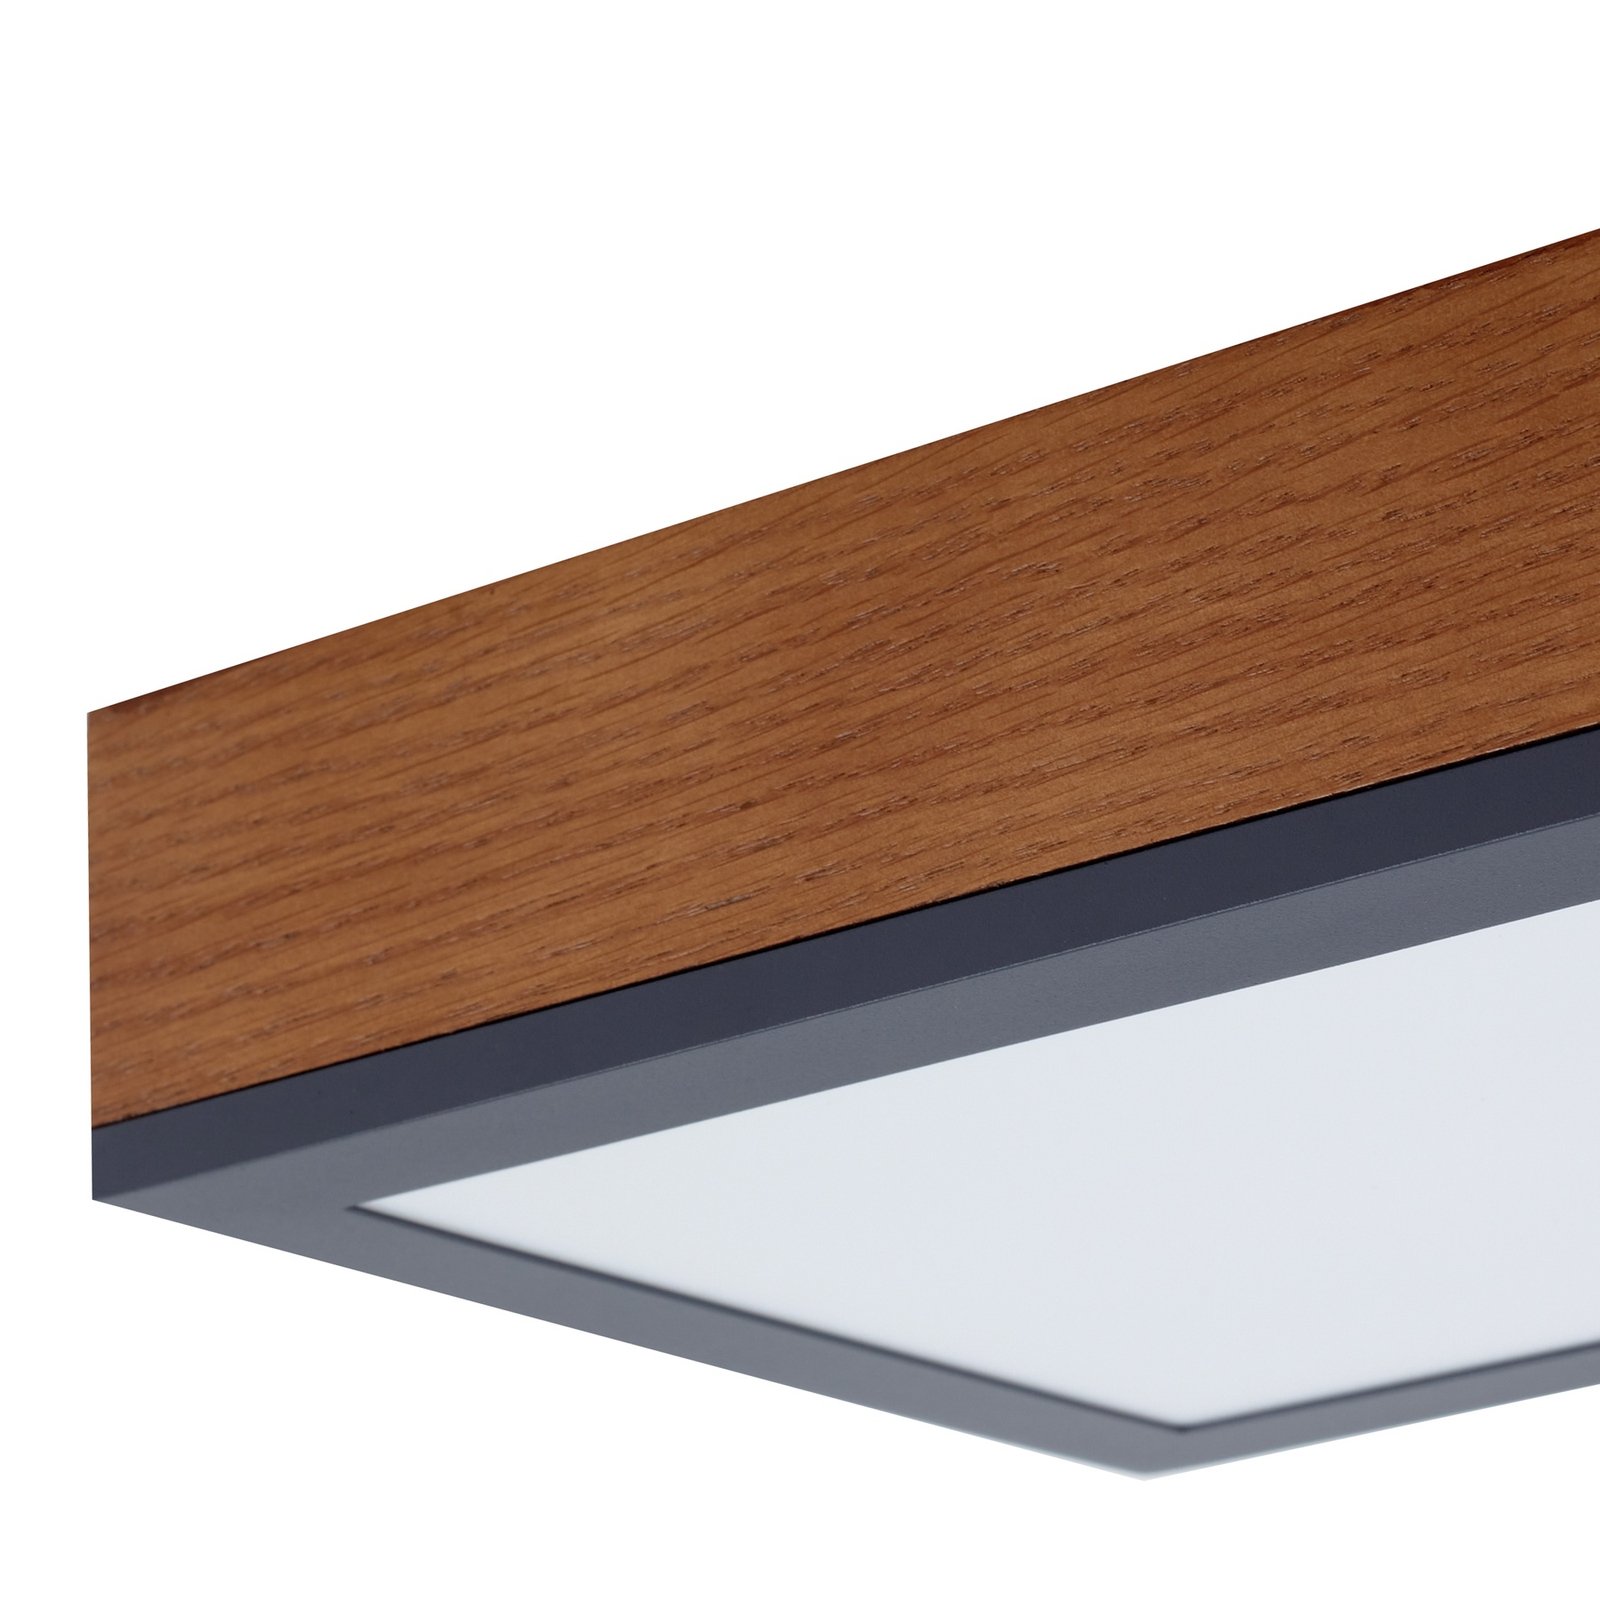 Lindby Laviona LED ceiling lamp with CCT, 80 cm